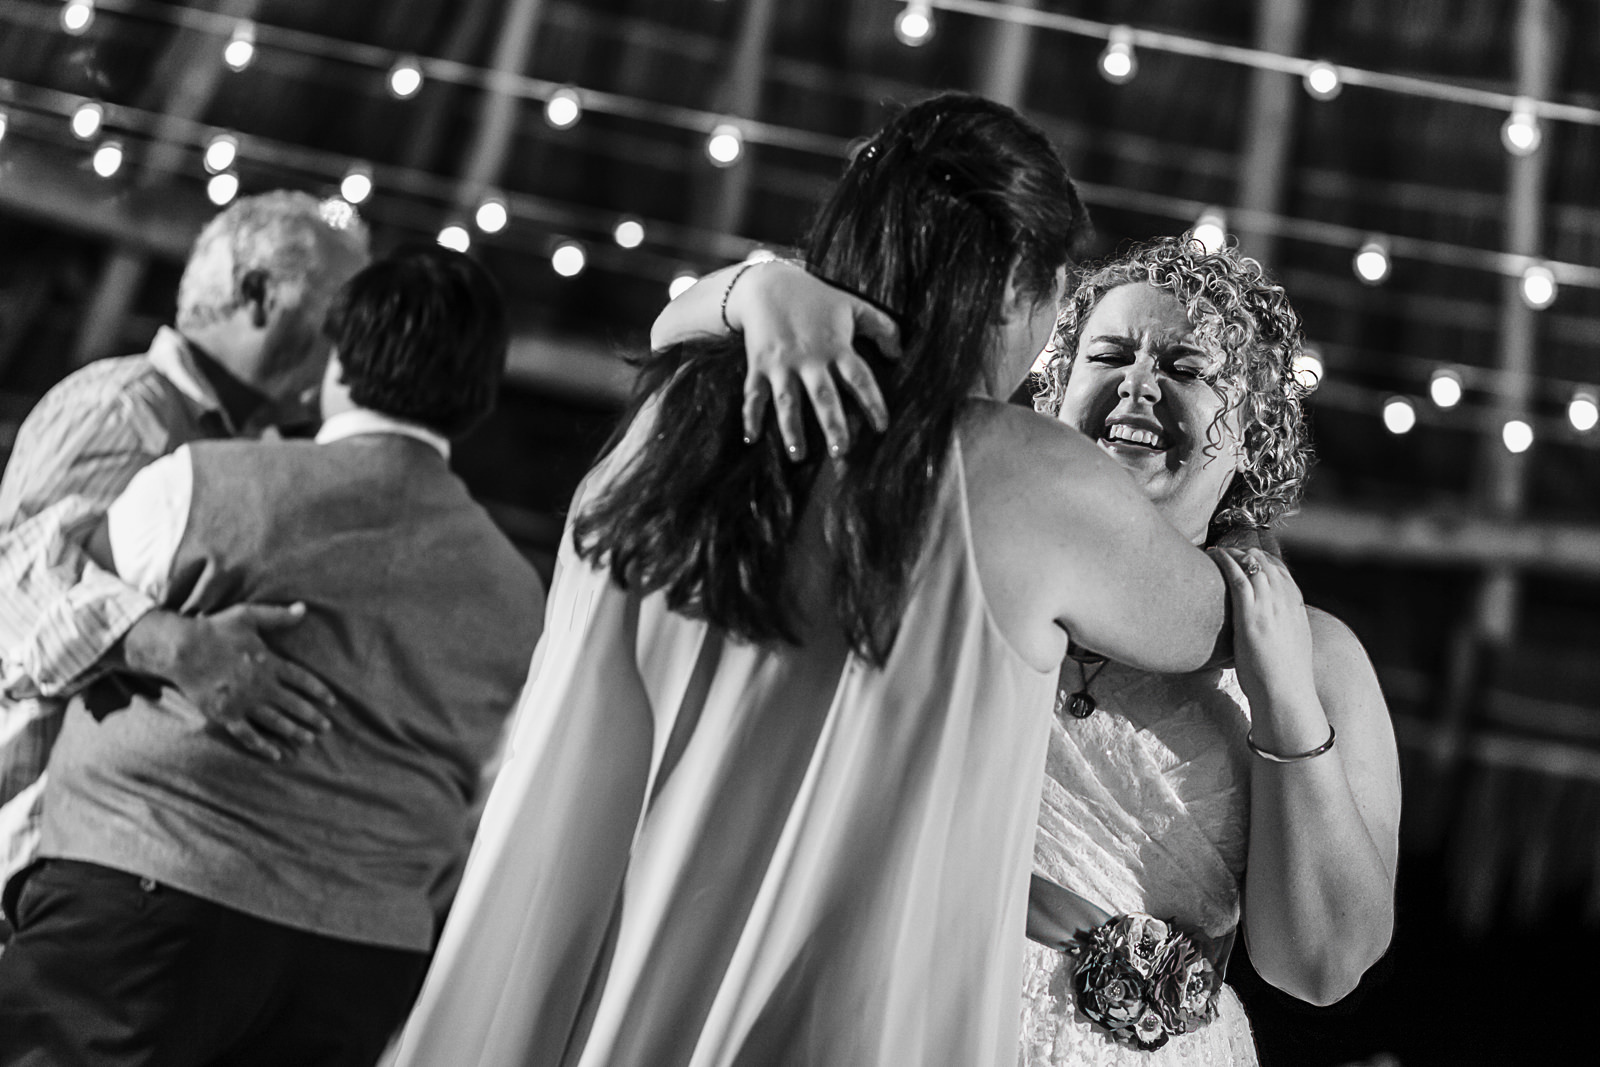 Bride dancing with mother-in-law at wedding reception